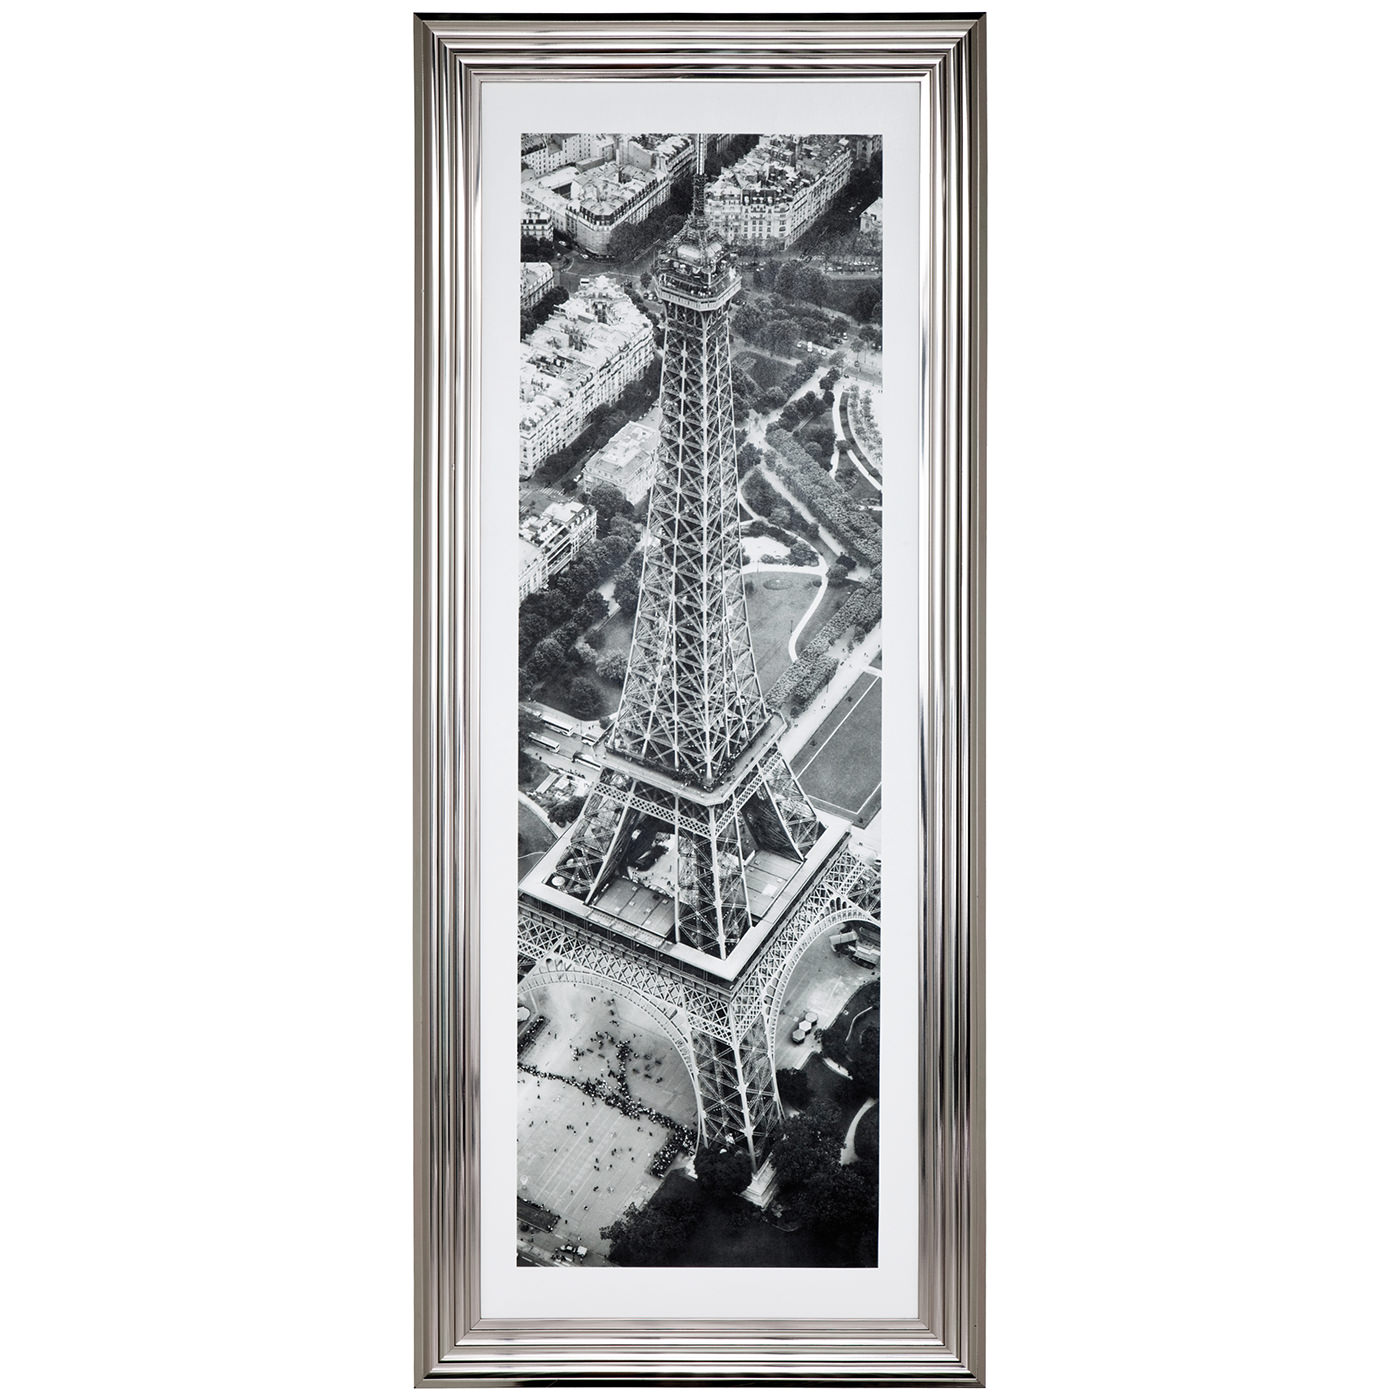 8 1353 114 6 Picture Frame Eiffel Tower 155x55cm 1